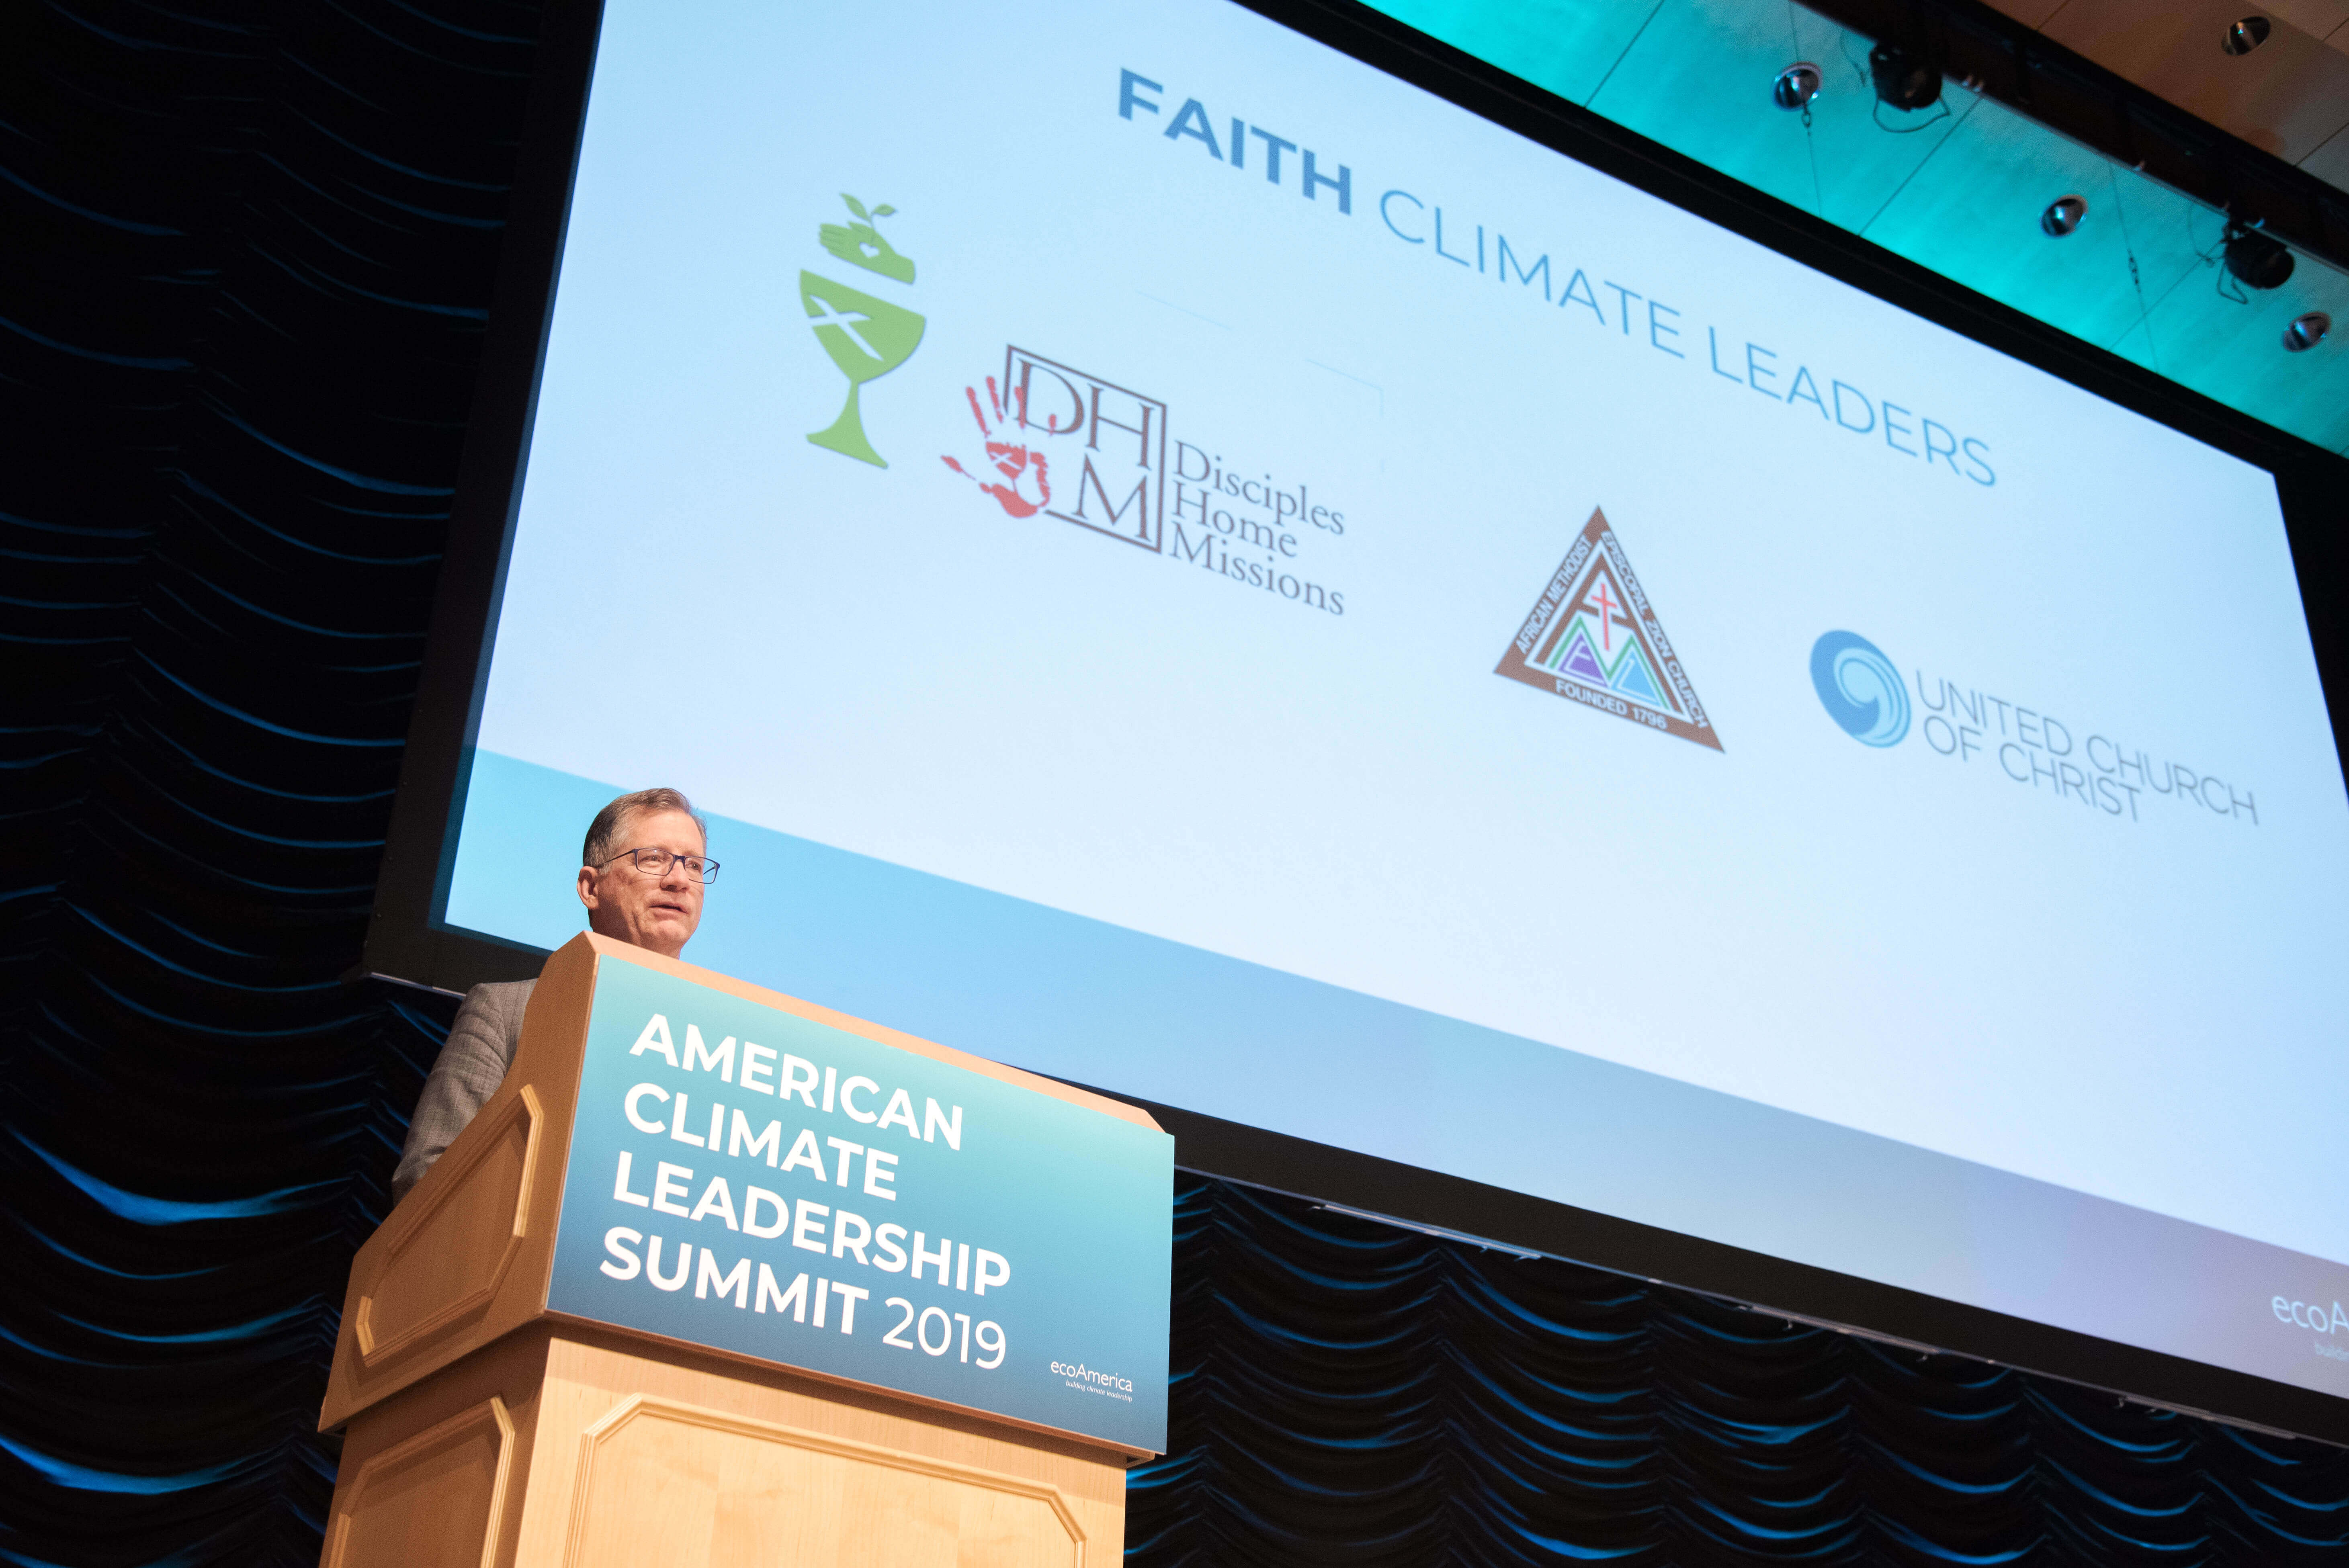 Vote for Climate Action Now: Faith, health, and local elected leaders urge Congress to act